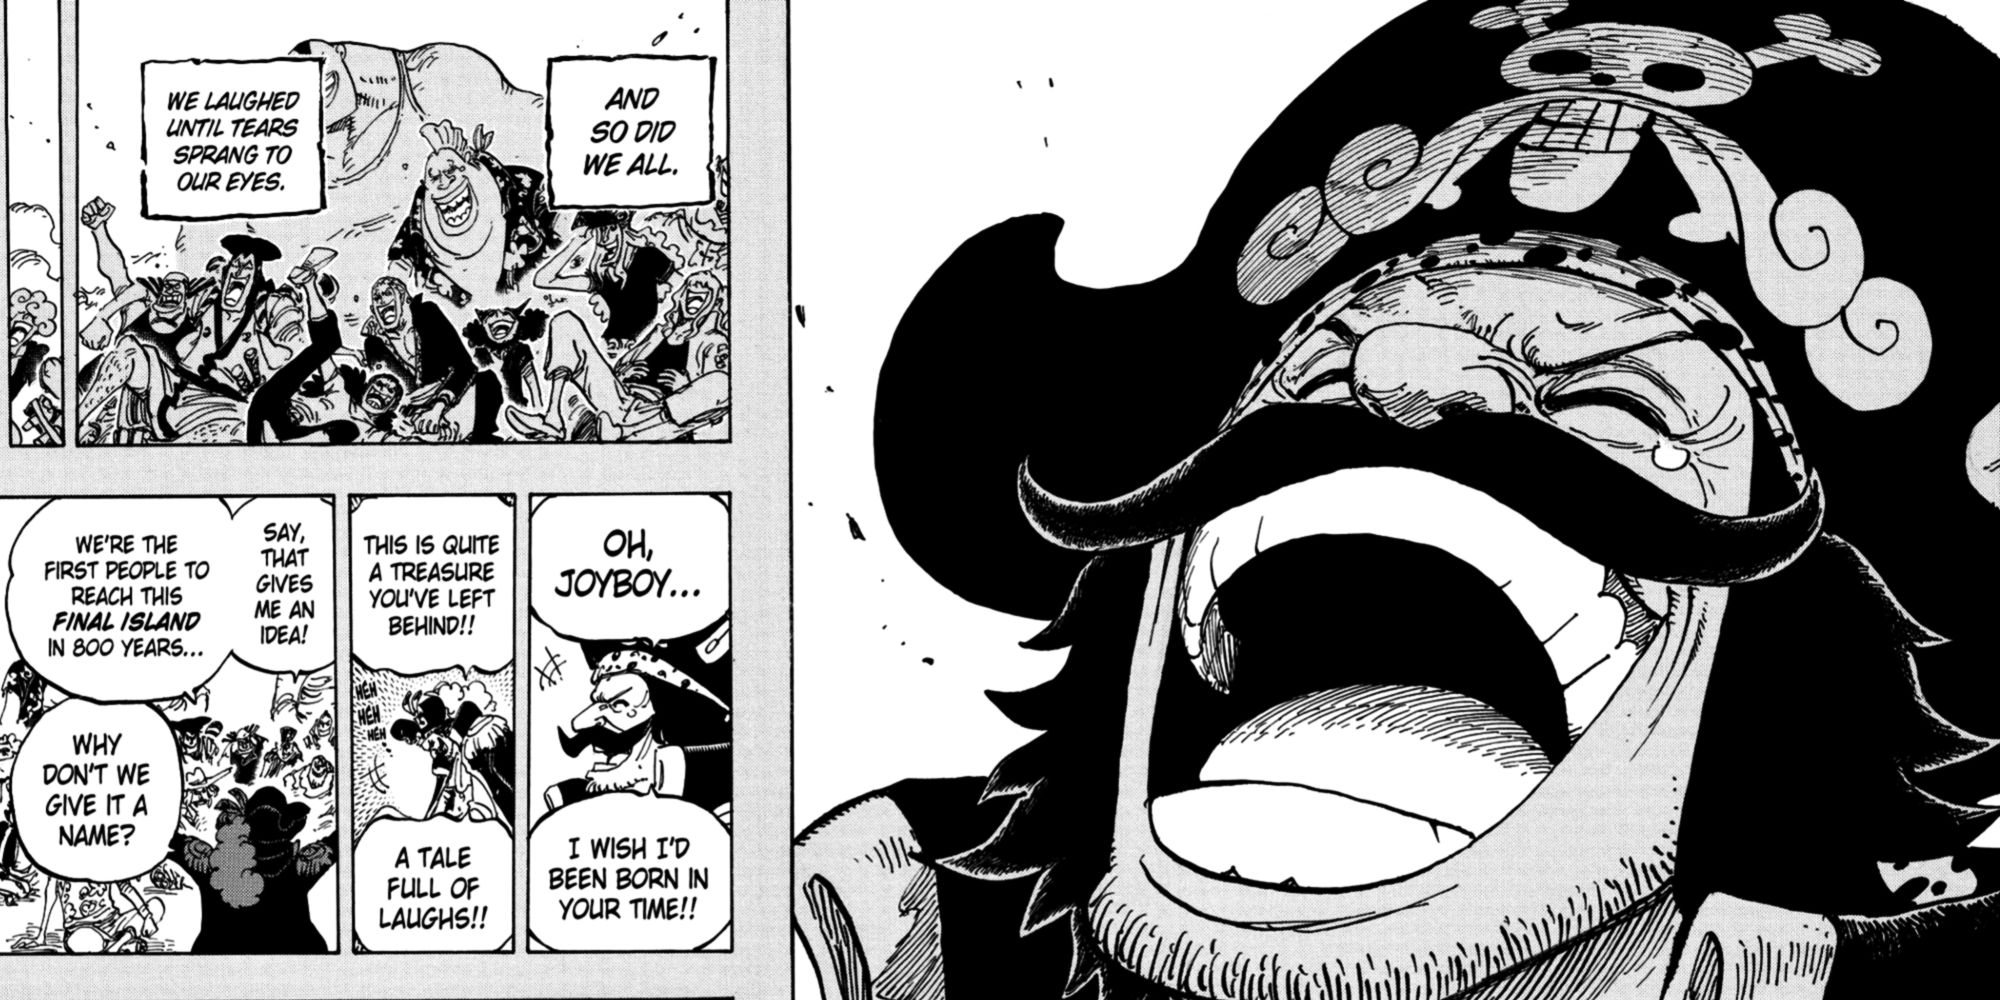 Roger laughs and talks about the final island in One Piece Chapter 967